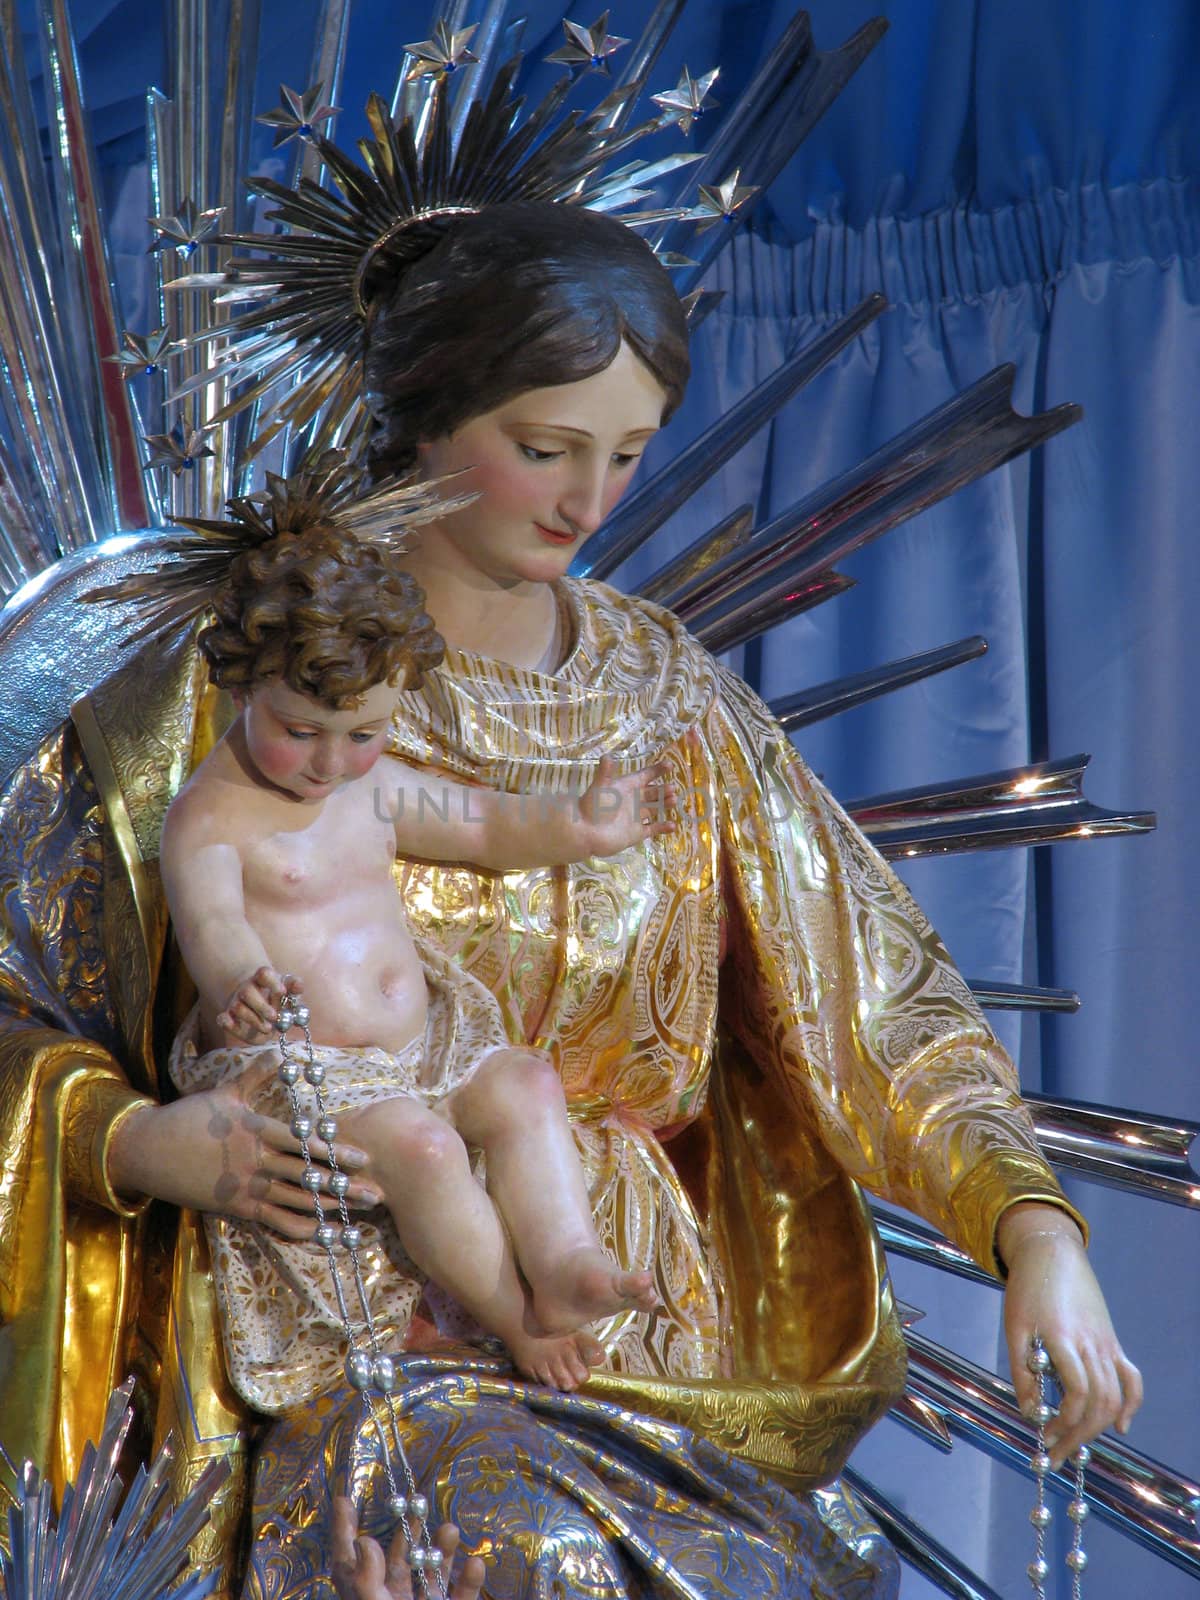 A detail of the statue of Our Lady of Pompeii in the village of Marsaxlokk, Malta.